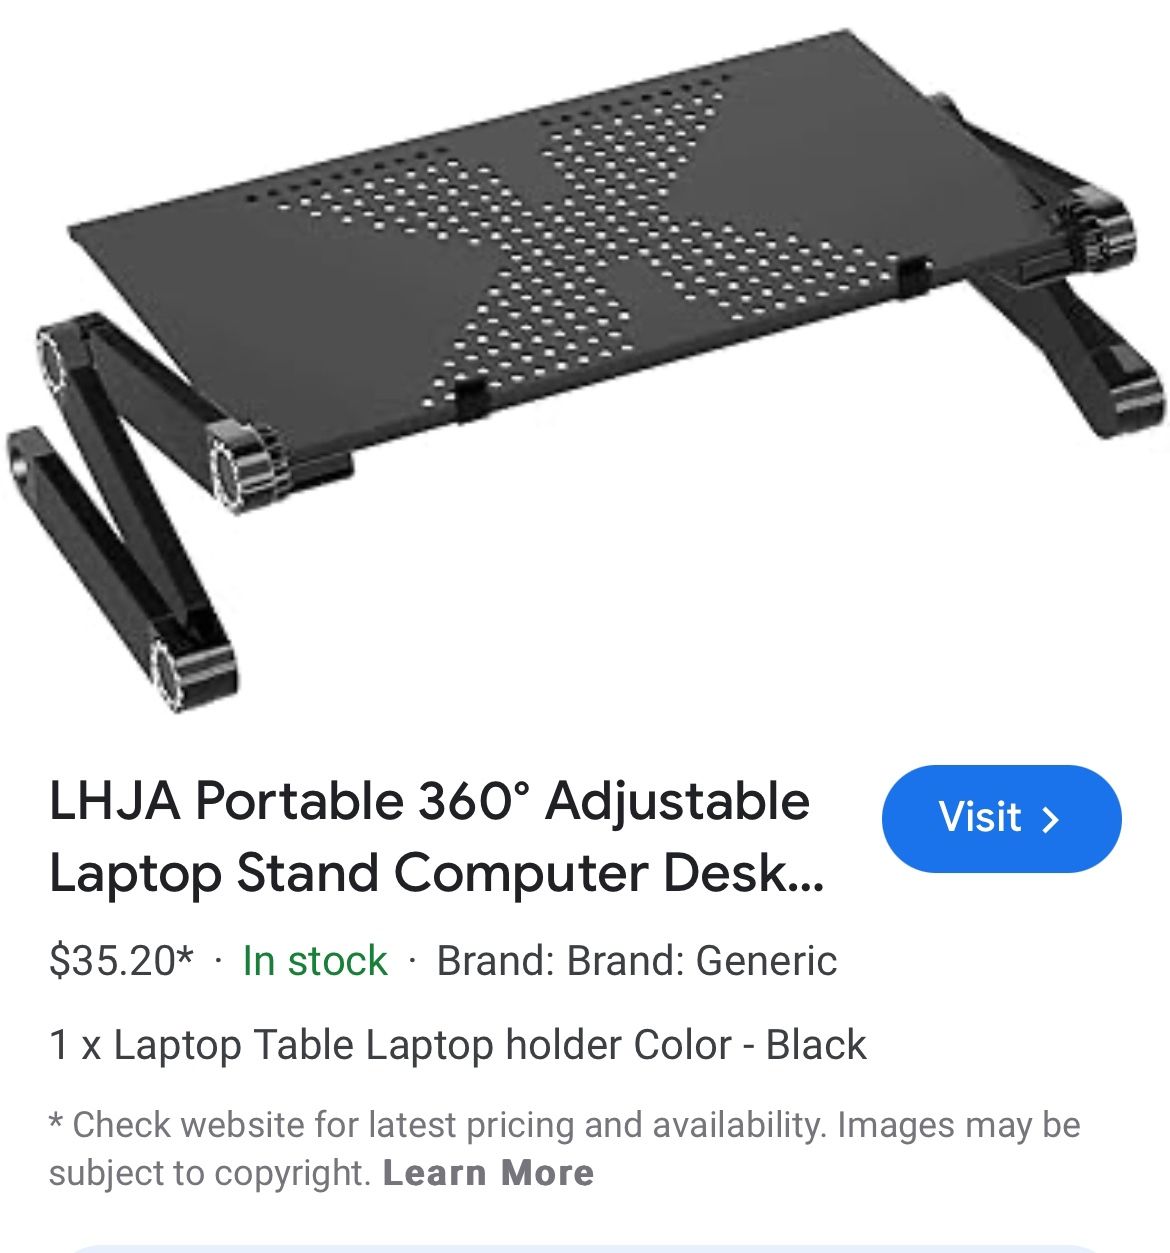 Portable 360 Adjustable Laptop Stand Computer